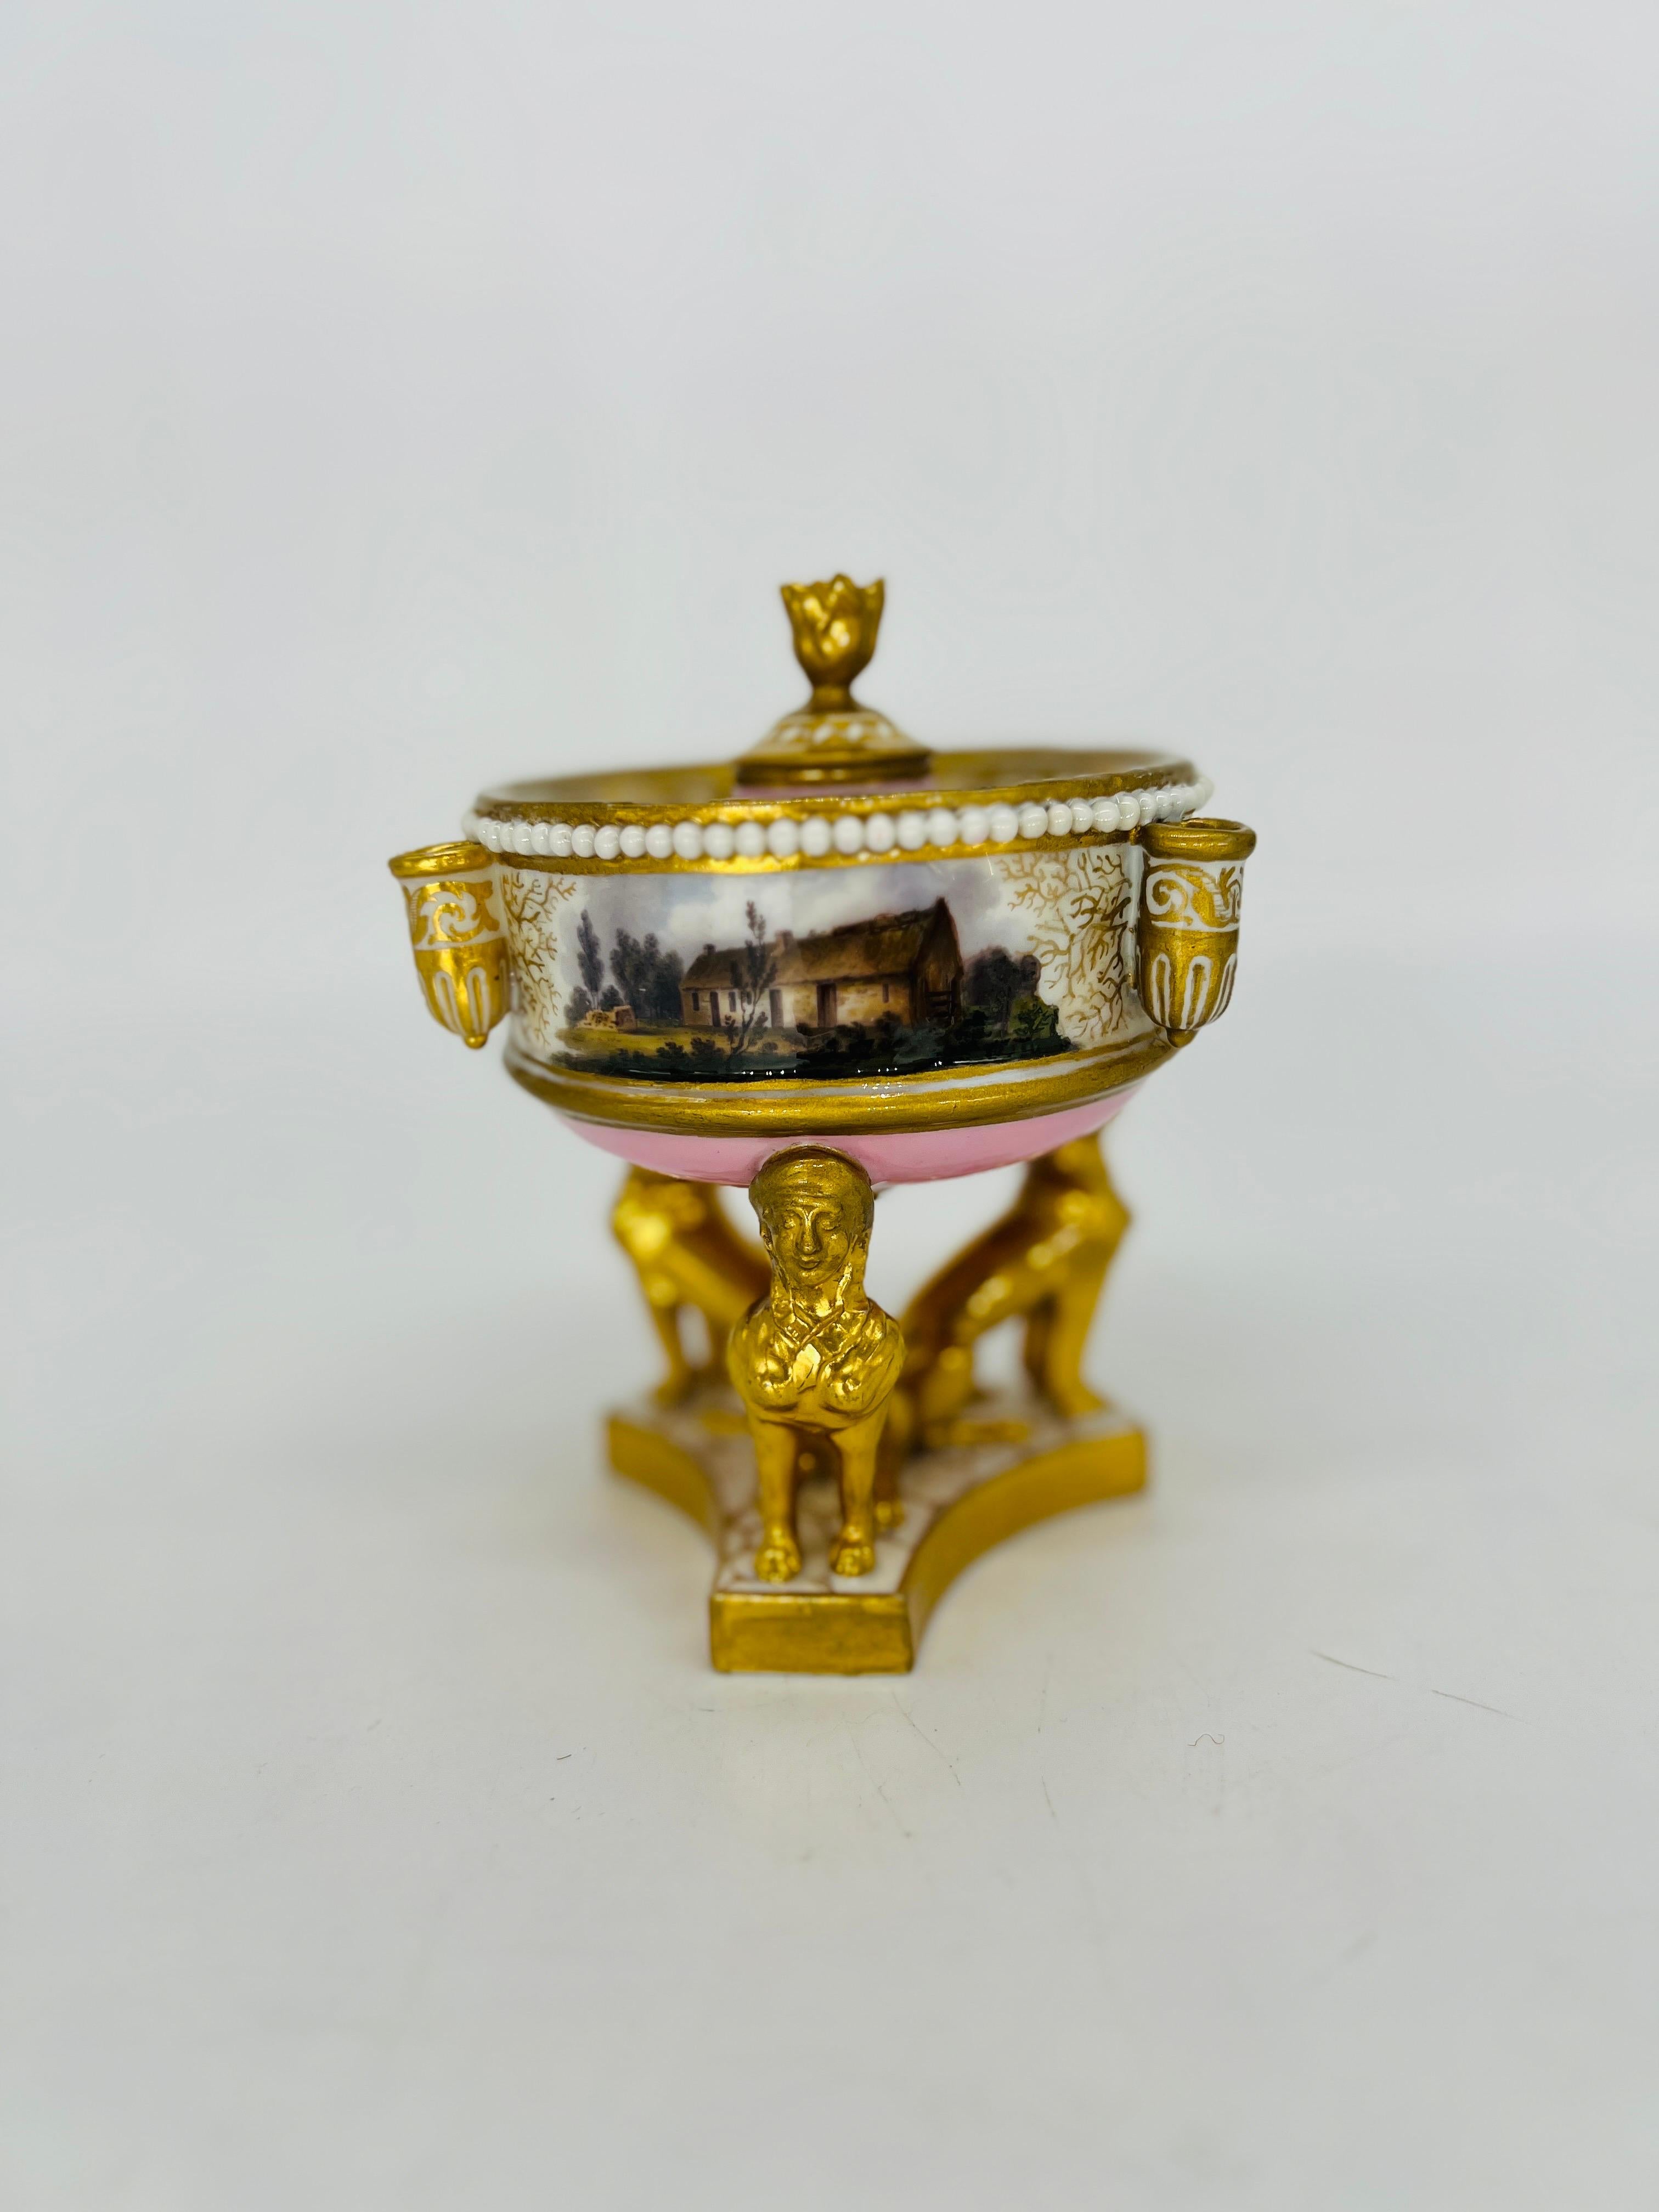 Those familiar with the finest quality porcelains produced by the Worcester Warmstry House Factory will understand how exceedingly rare and impressive this inkwell truly is. Not only was it created under the likely hand of William Billingsley or